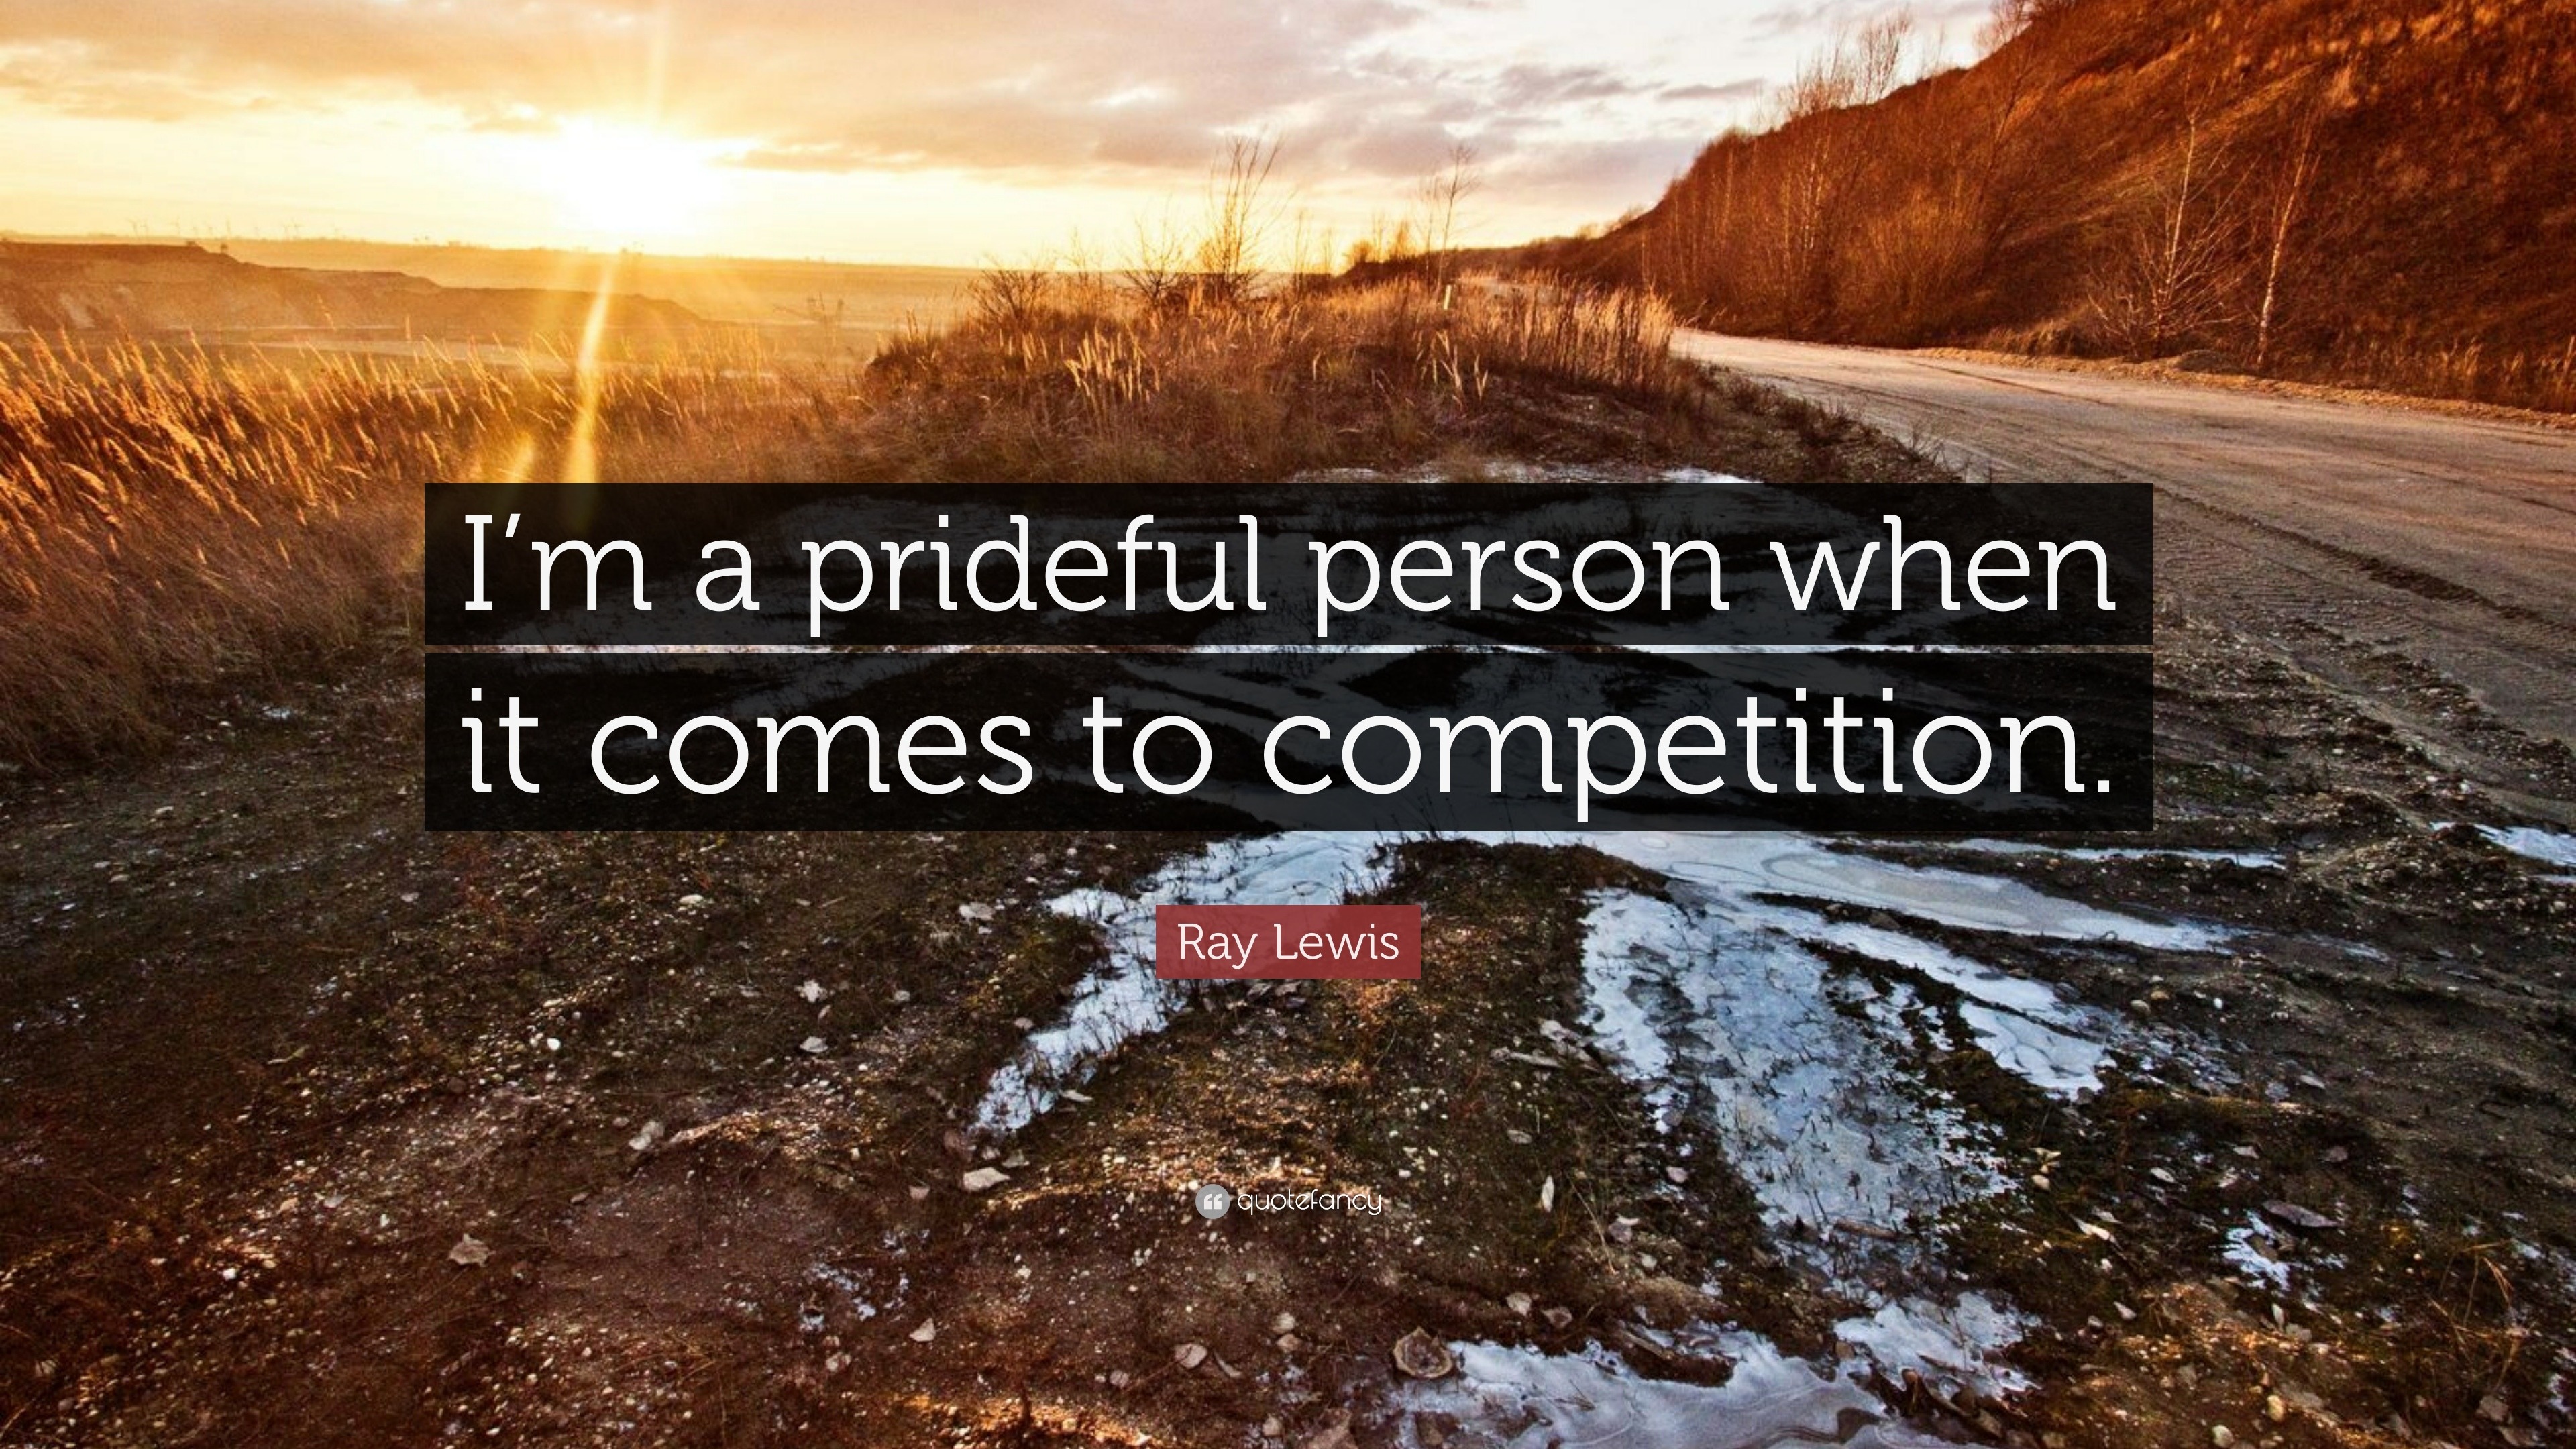 competition quotes by famous people